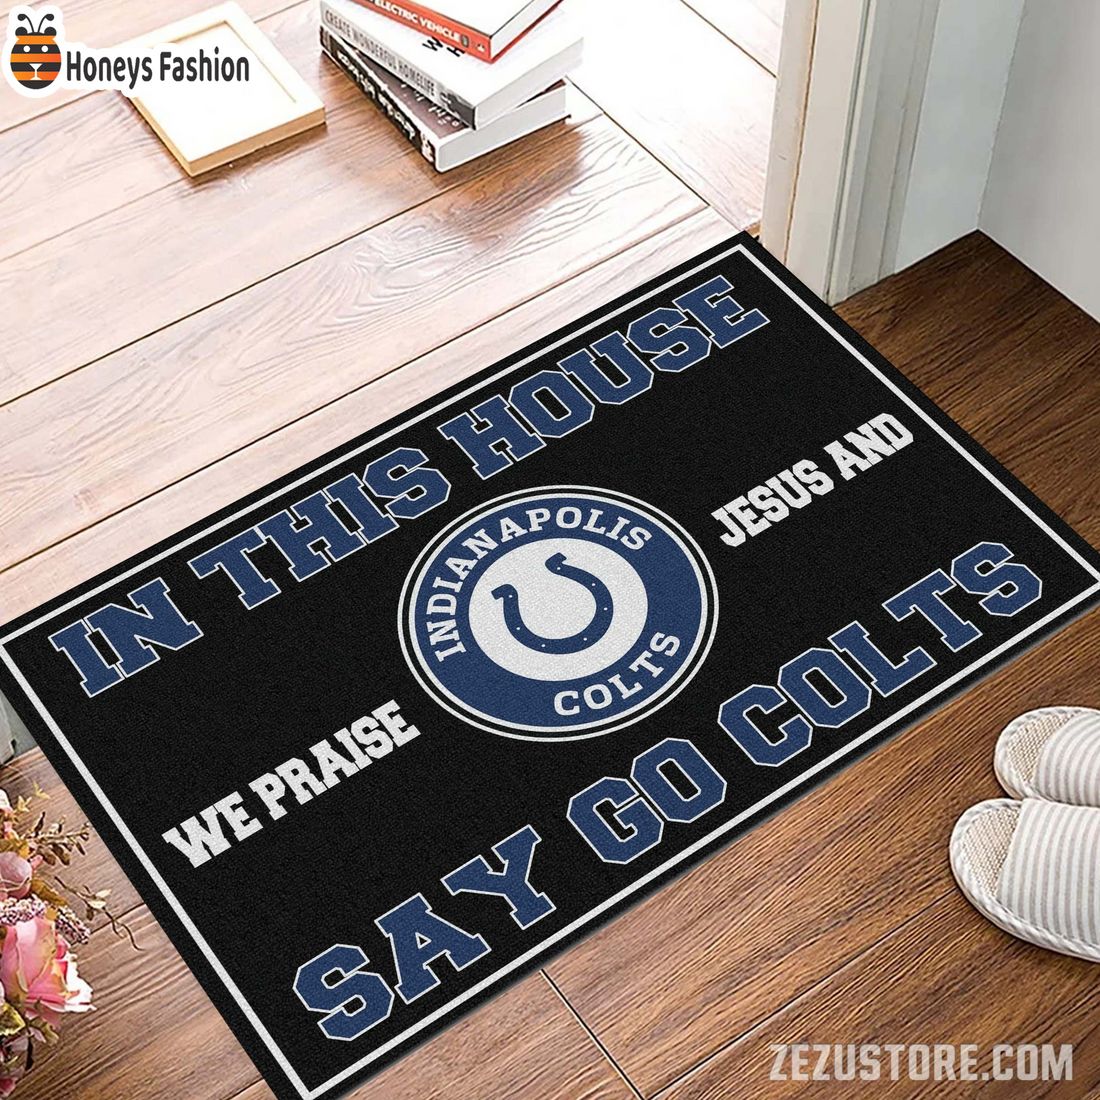 In this house we praise jesus and say go Colts doormat